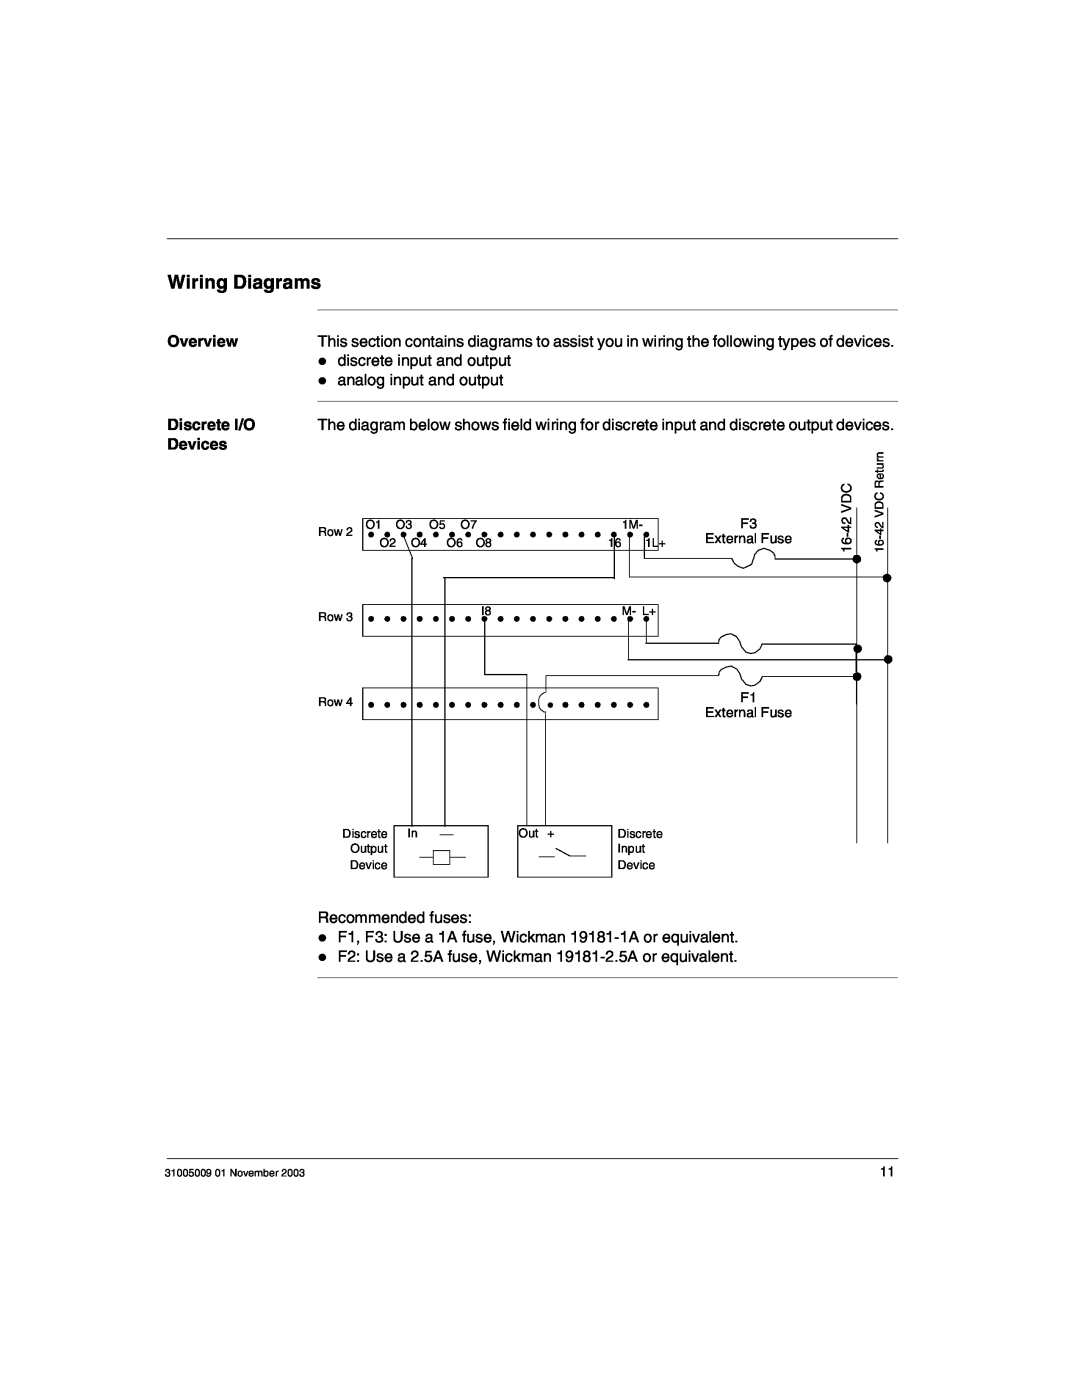 Schneider Electric 170AMM11030 Wiring Diagrams, discrete input and output analog input and output, Discrete I/O, Devices 